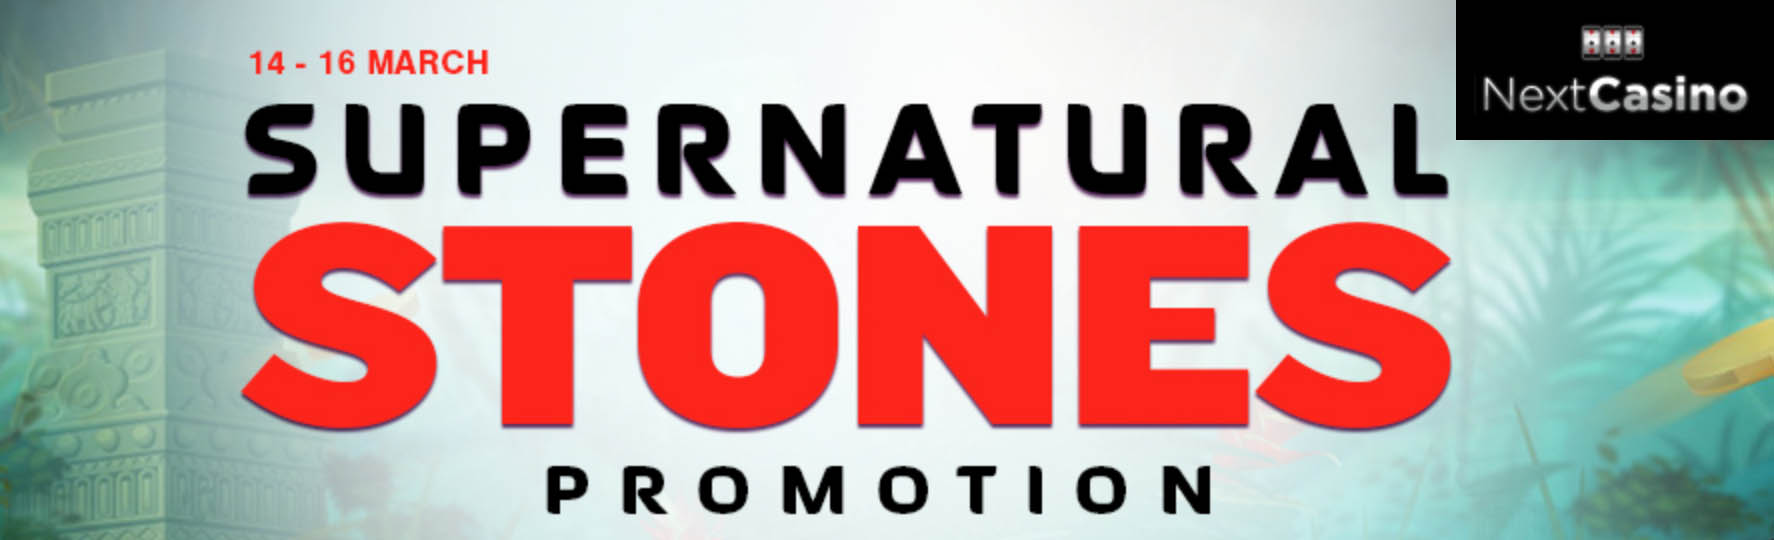 Win Bonus Spins and a Nintendo Switch in the Supernatural Stones Promo at Next Casino